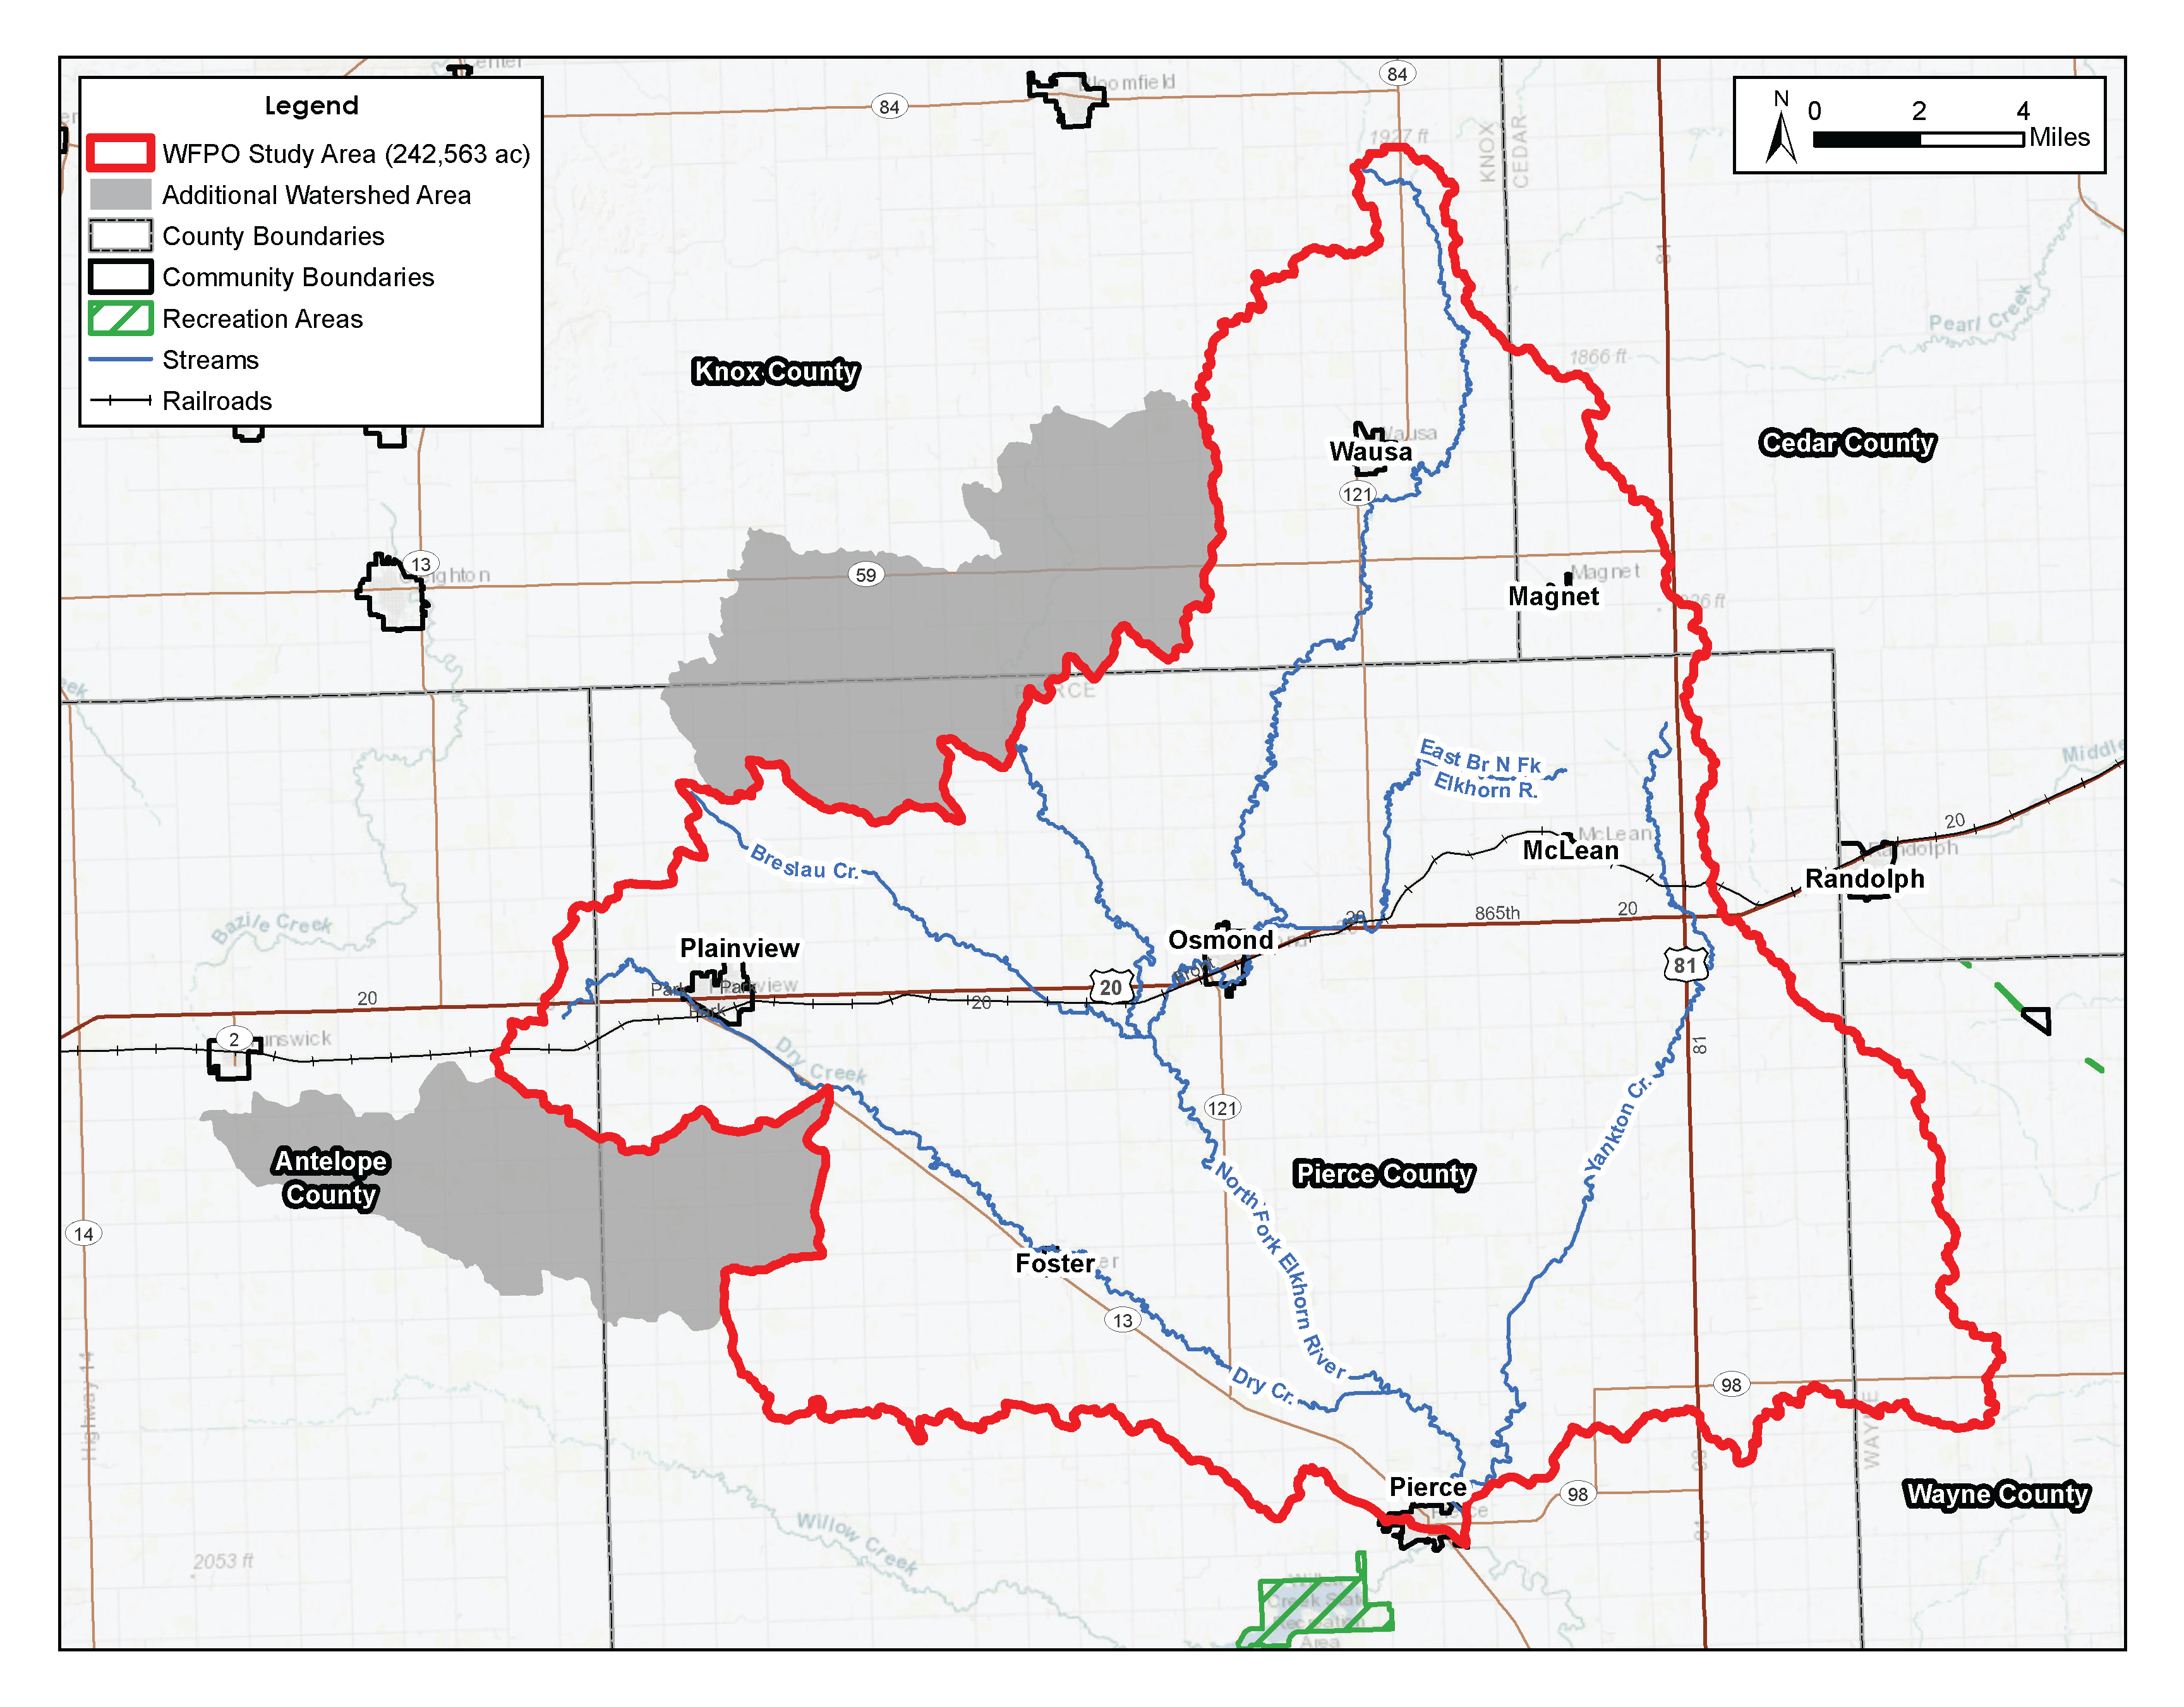 Watershed Study Area